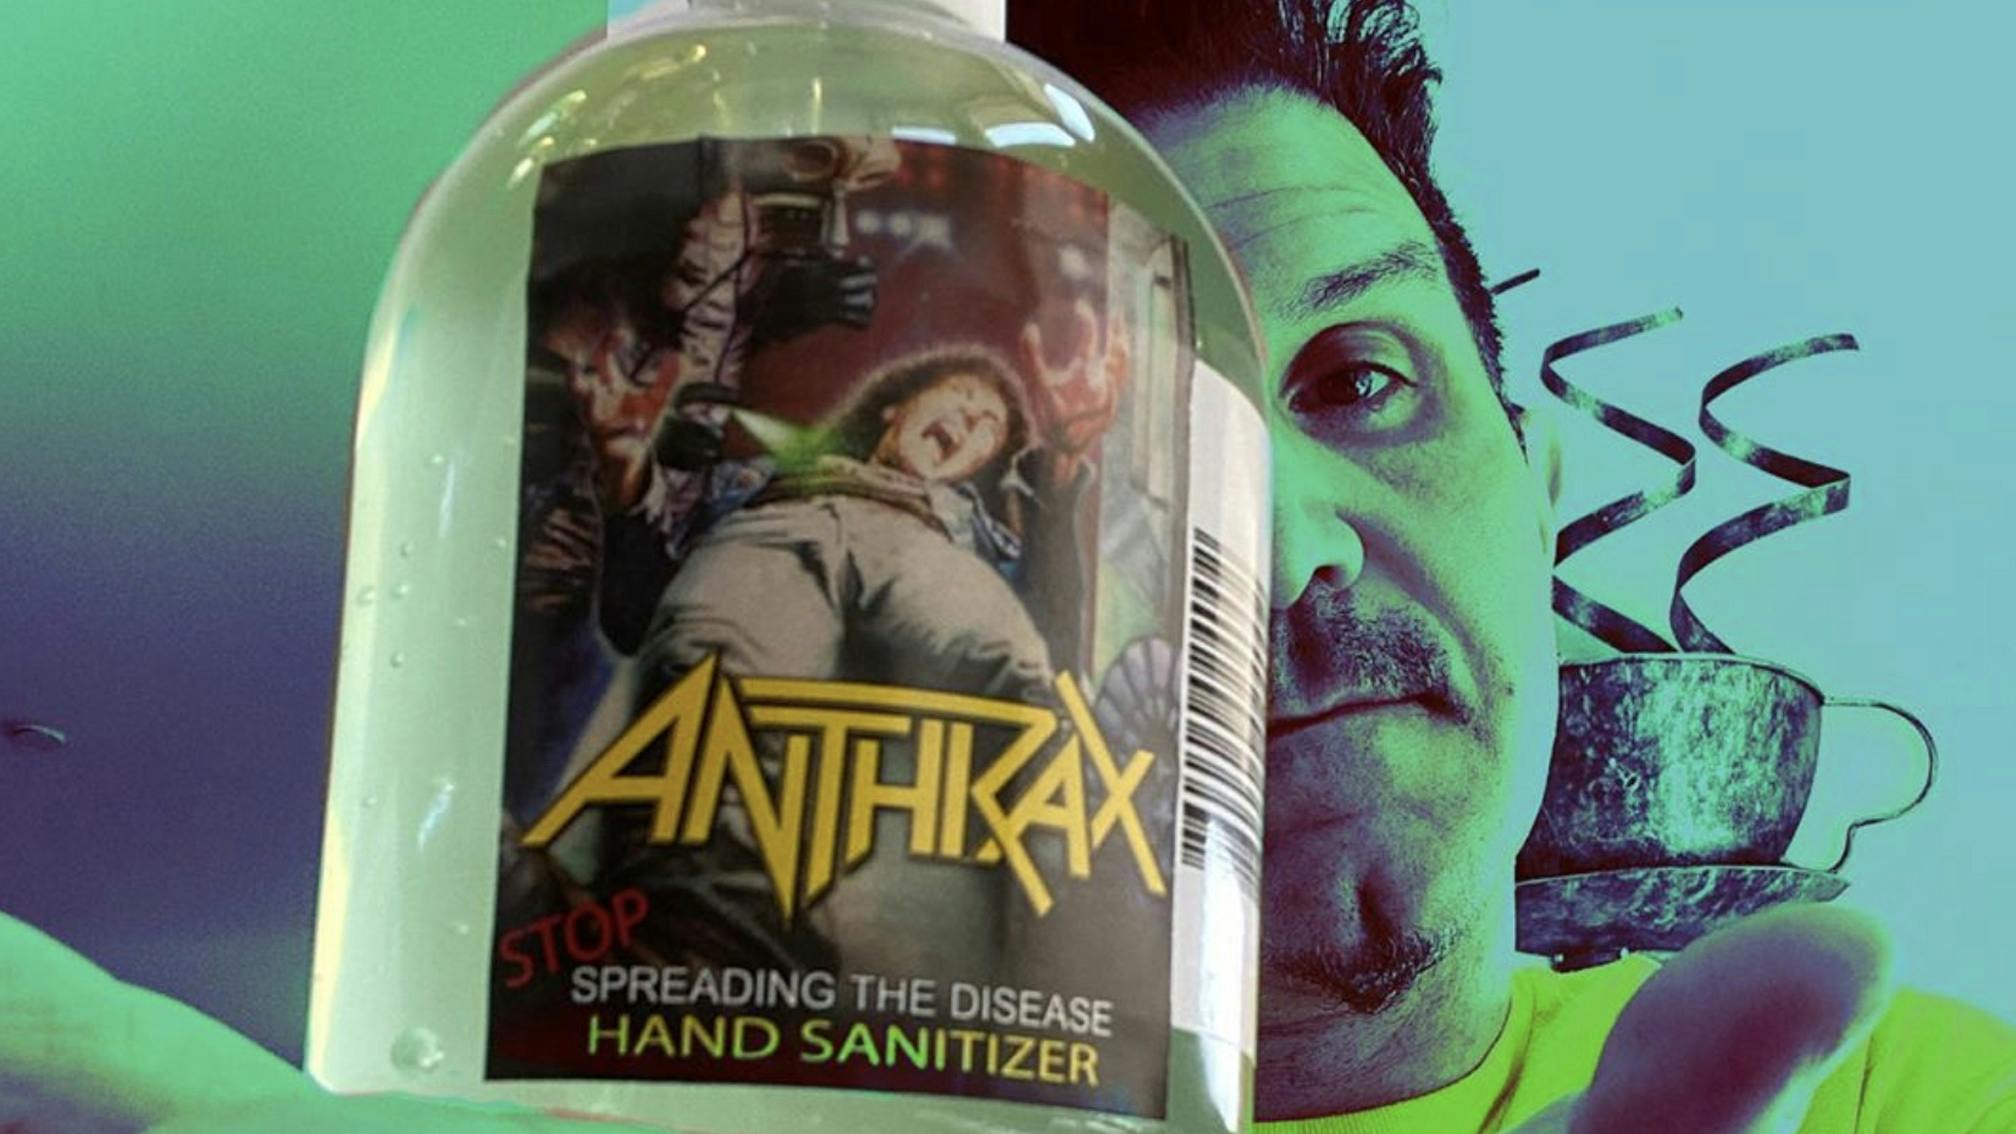 Anthrax To Release ‘Stop Spreading The Disease’ Hand Sanitiser